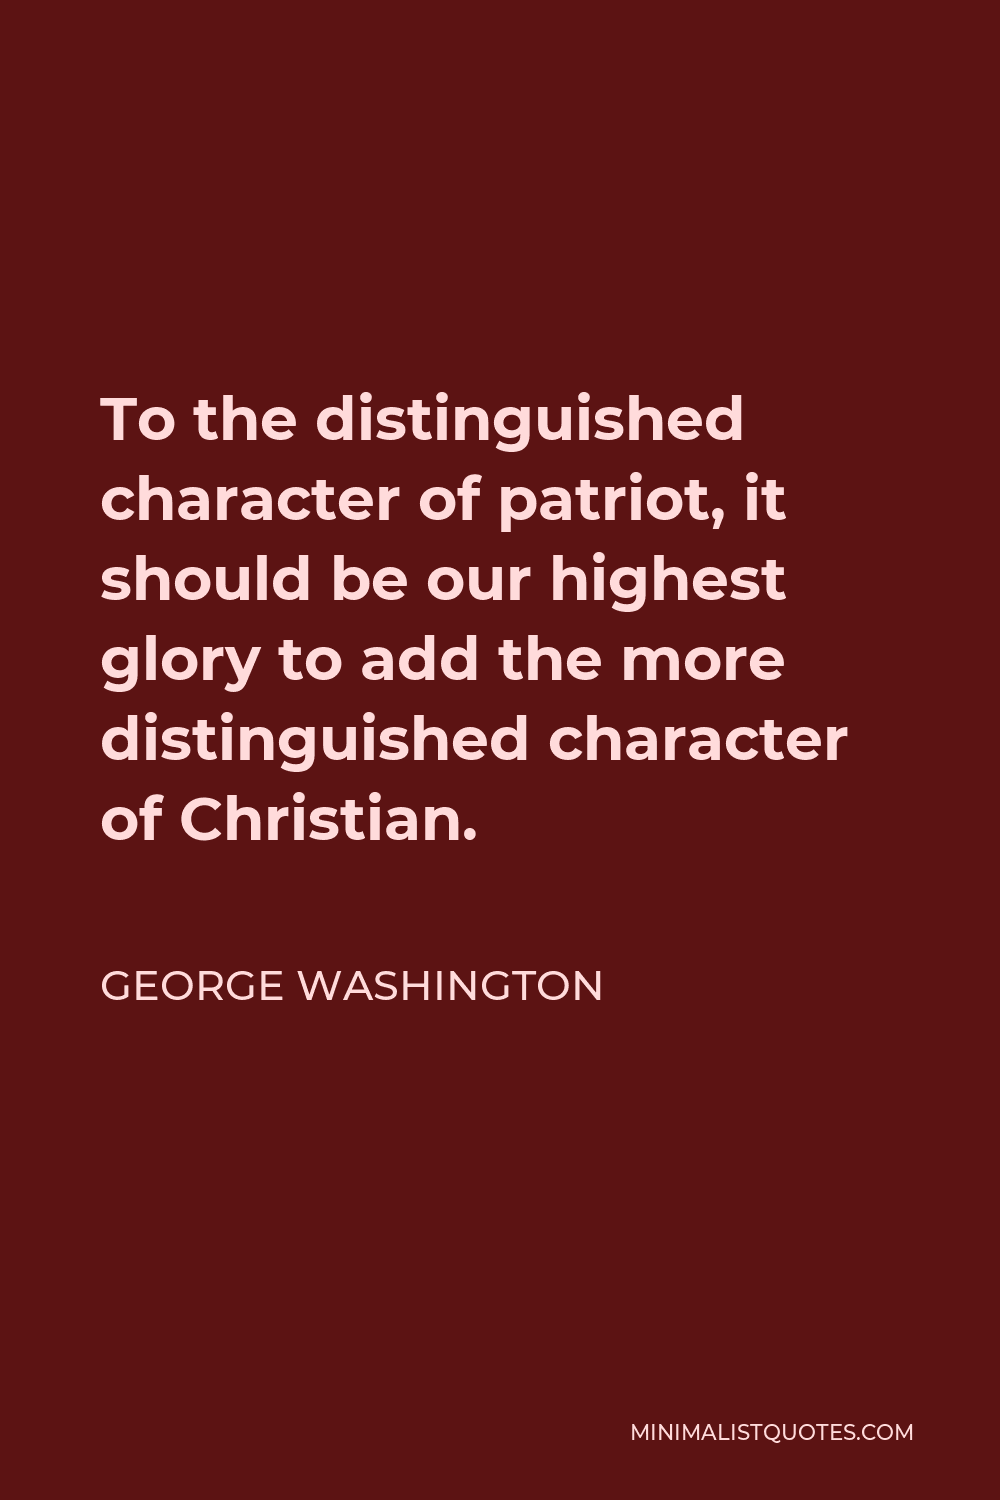 George Washington Quote - To the distinguished character of patriot, it should be our highest glory to add the more distinguished character of Christian.